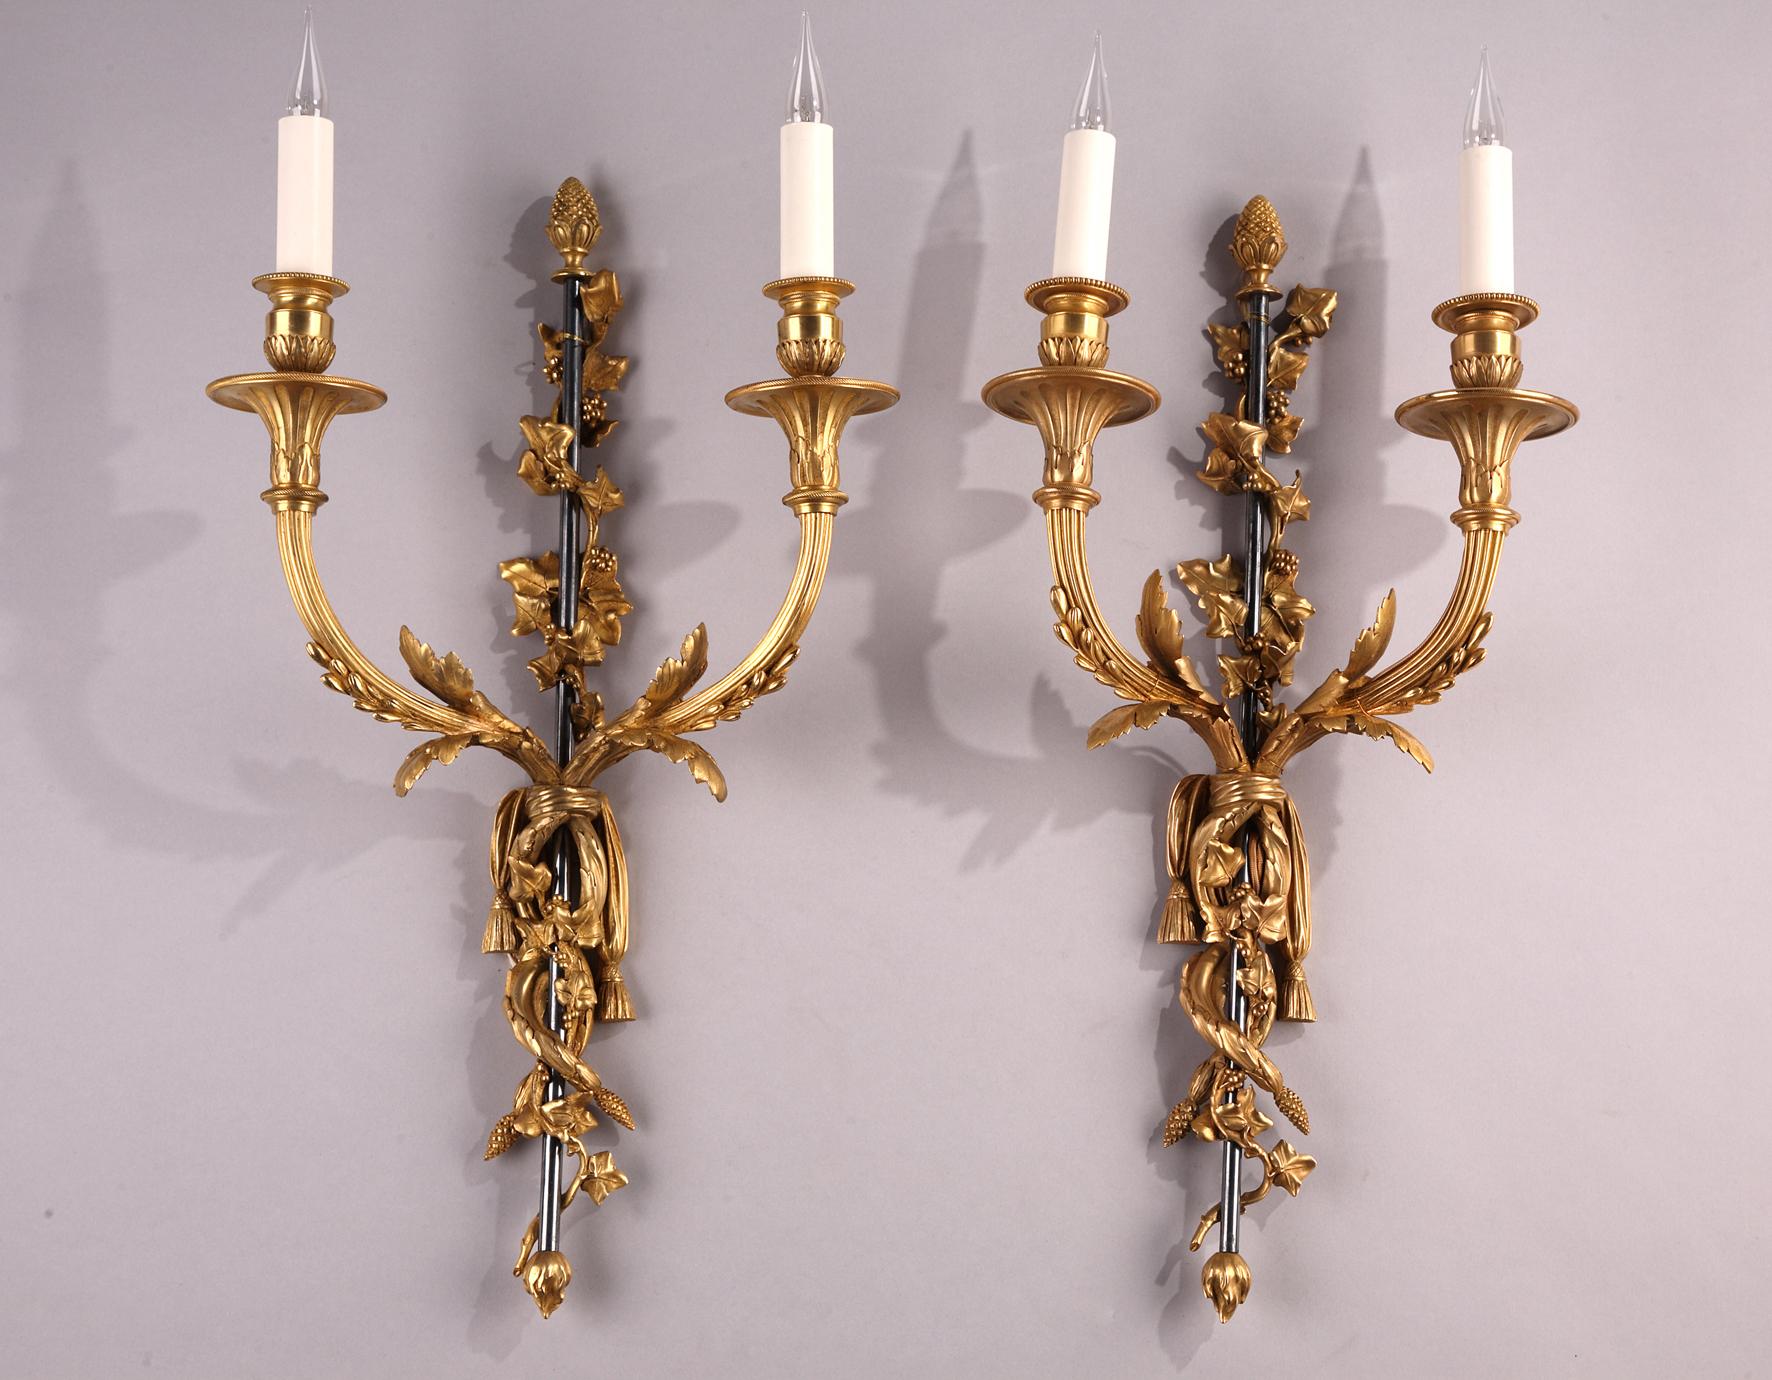 Chased and gilt bronze sconces attributed to H. Vian, each comprising a “gun barrel” shaft surmounted by a pine cone and entwined with ivy branches. Two foliated creepers tied with a cloth are interlaced around the central shaft and give rise to two